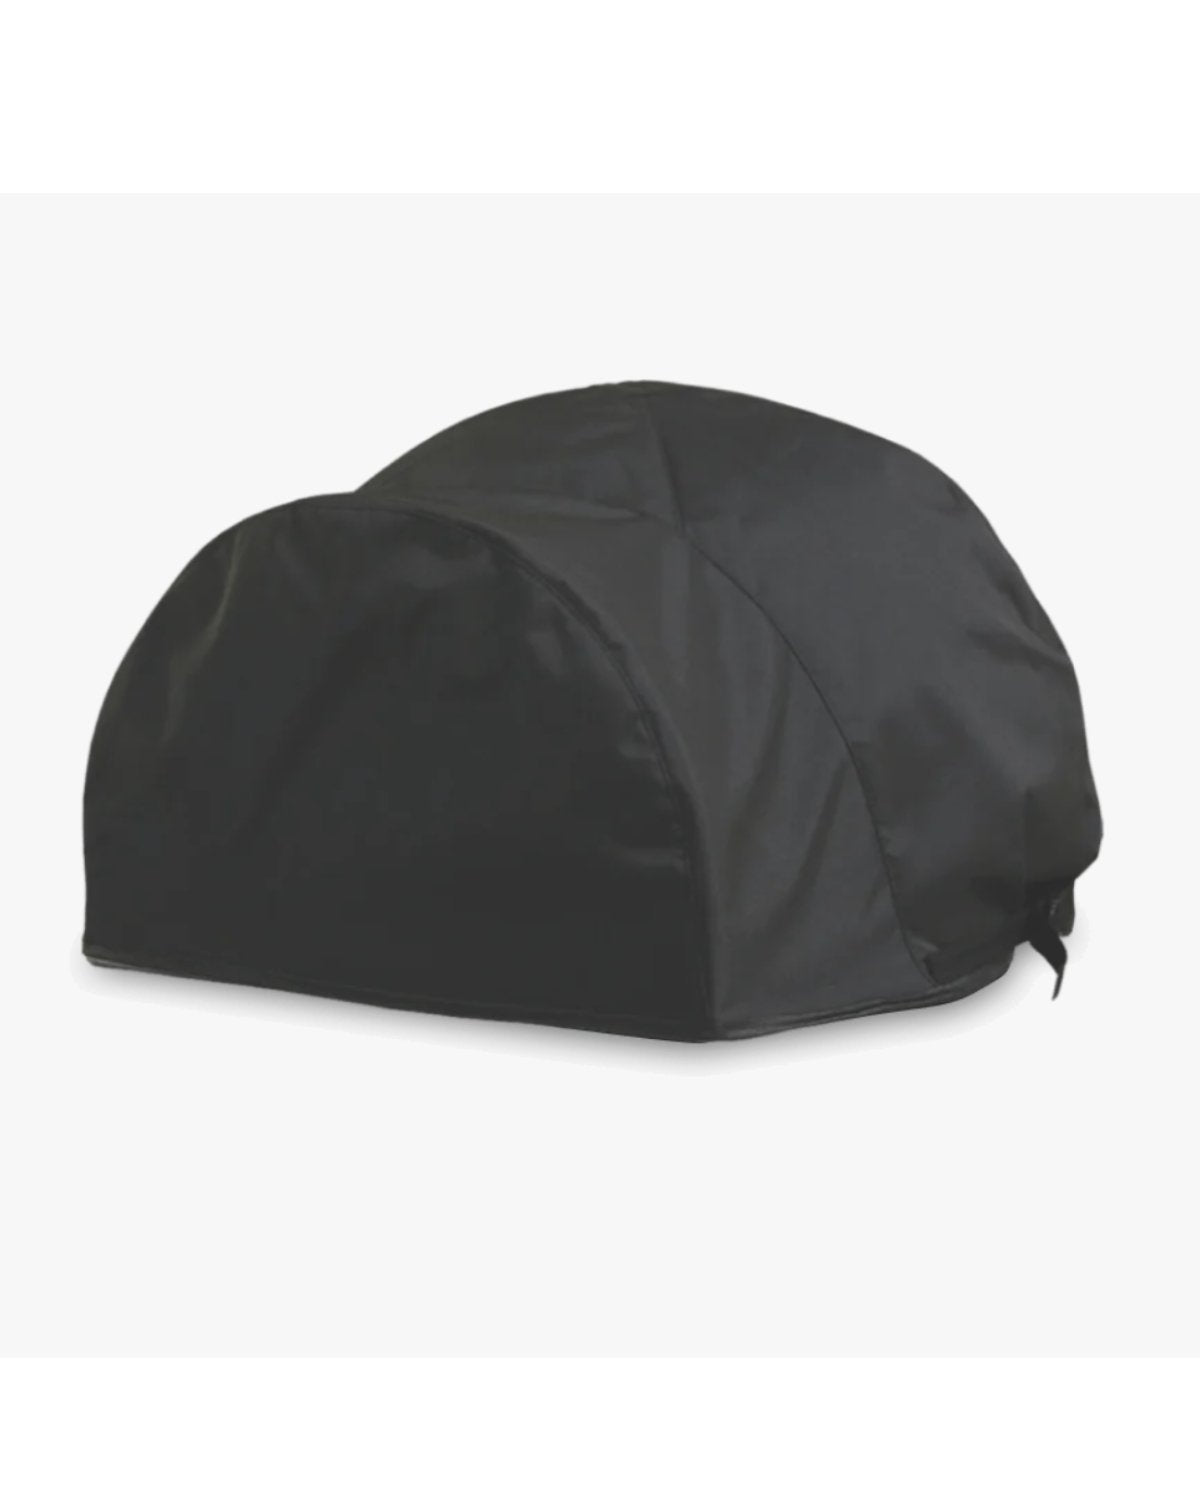 Delivita All Weather Oven Cover - The Outdoor Kitchen Company Ltd